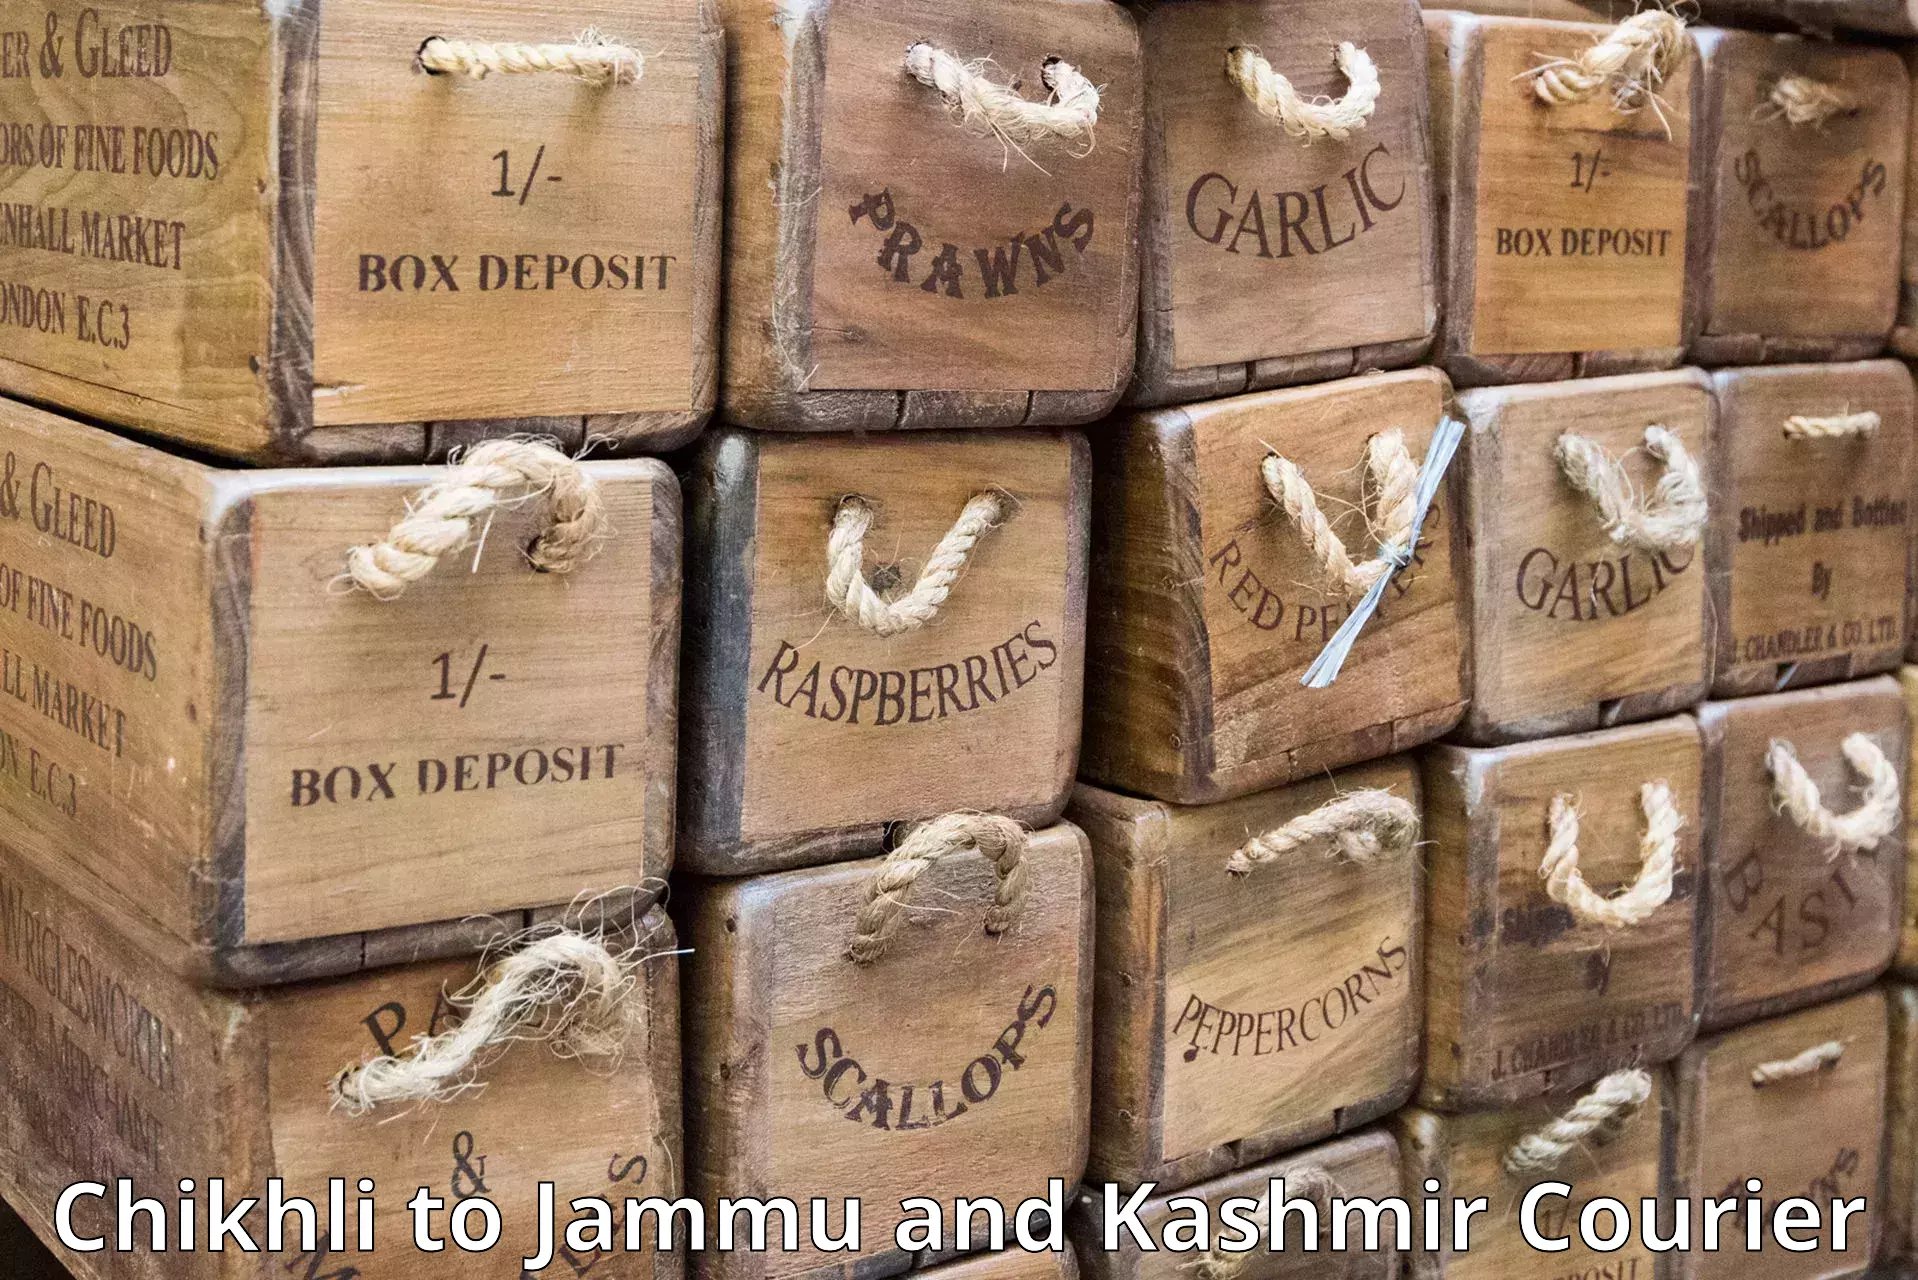 24/7 courier service in Chikhli to Jammu